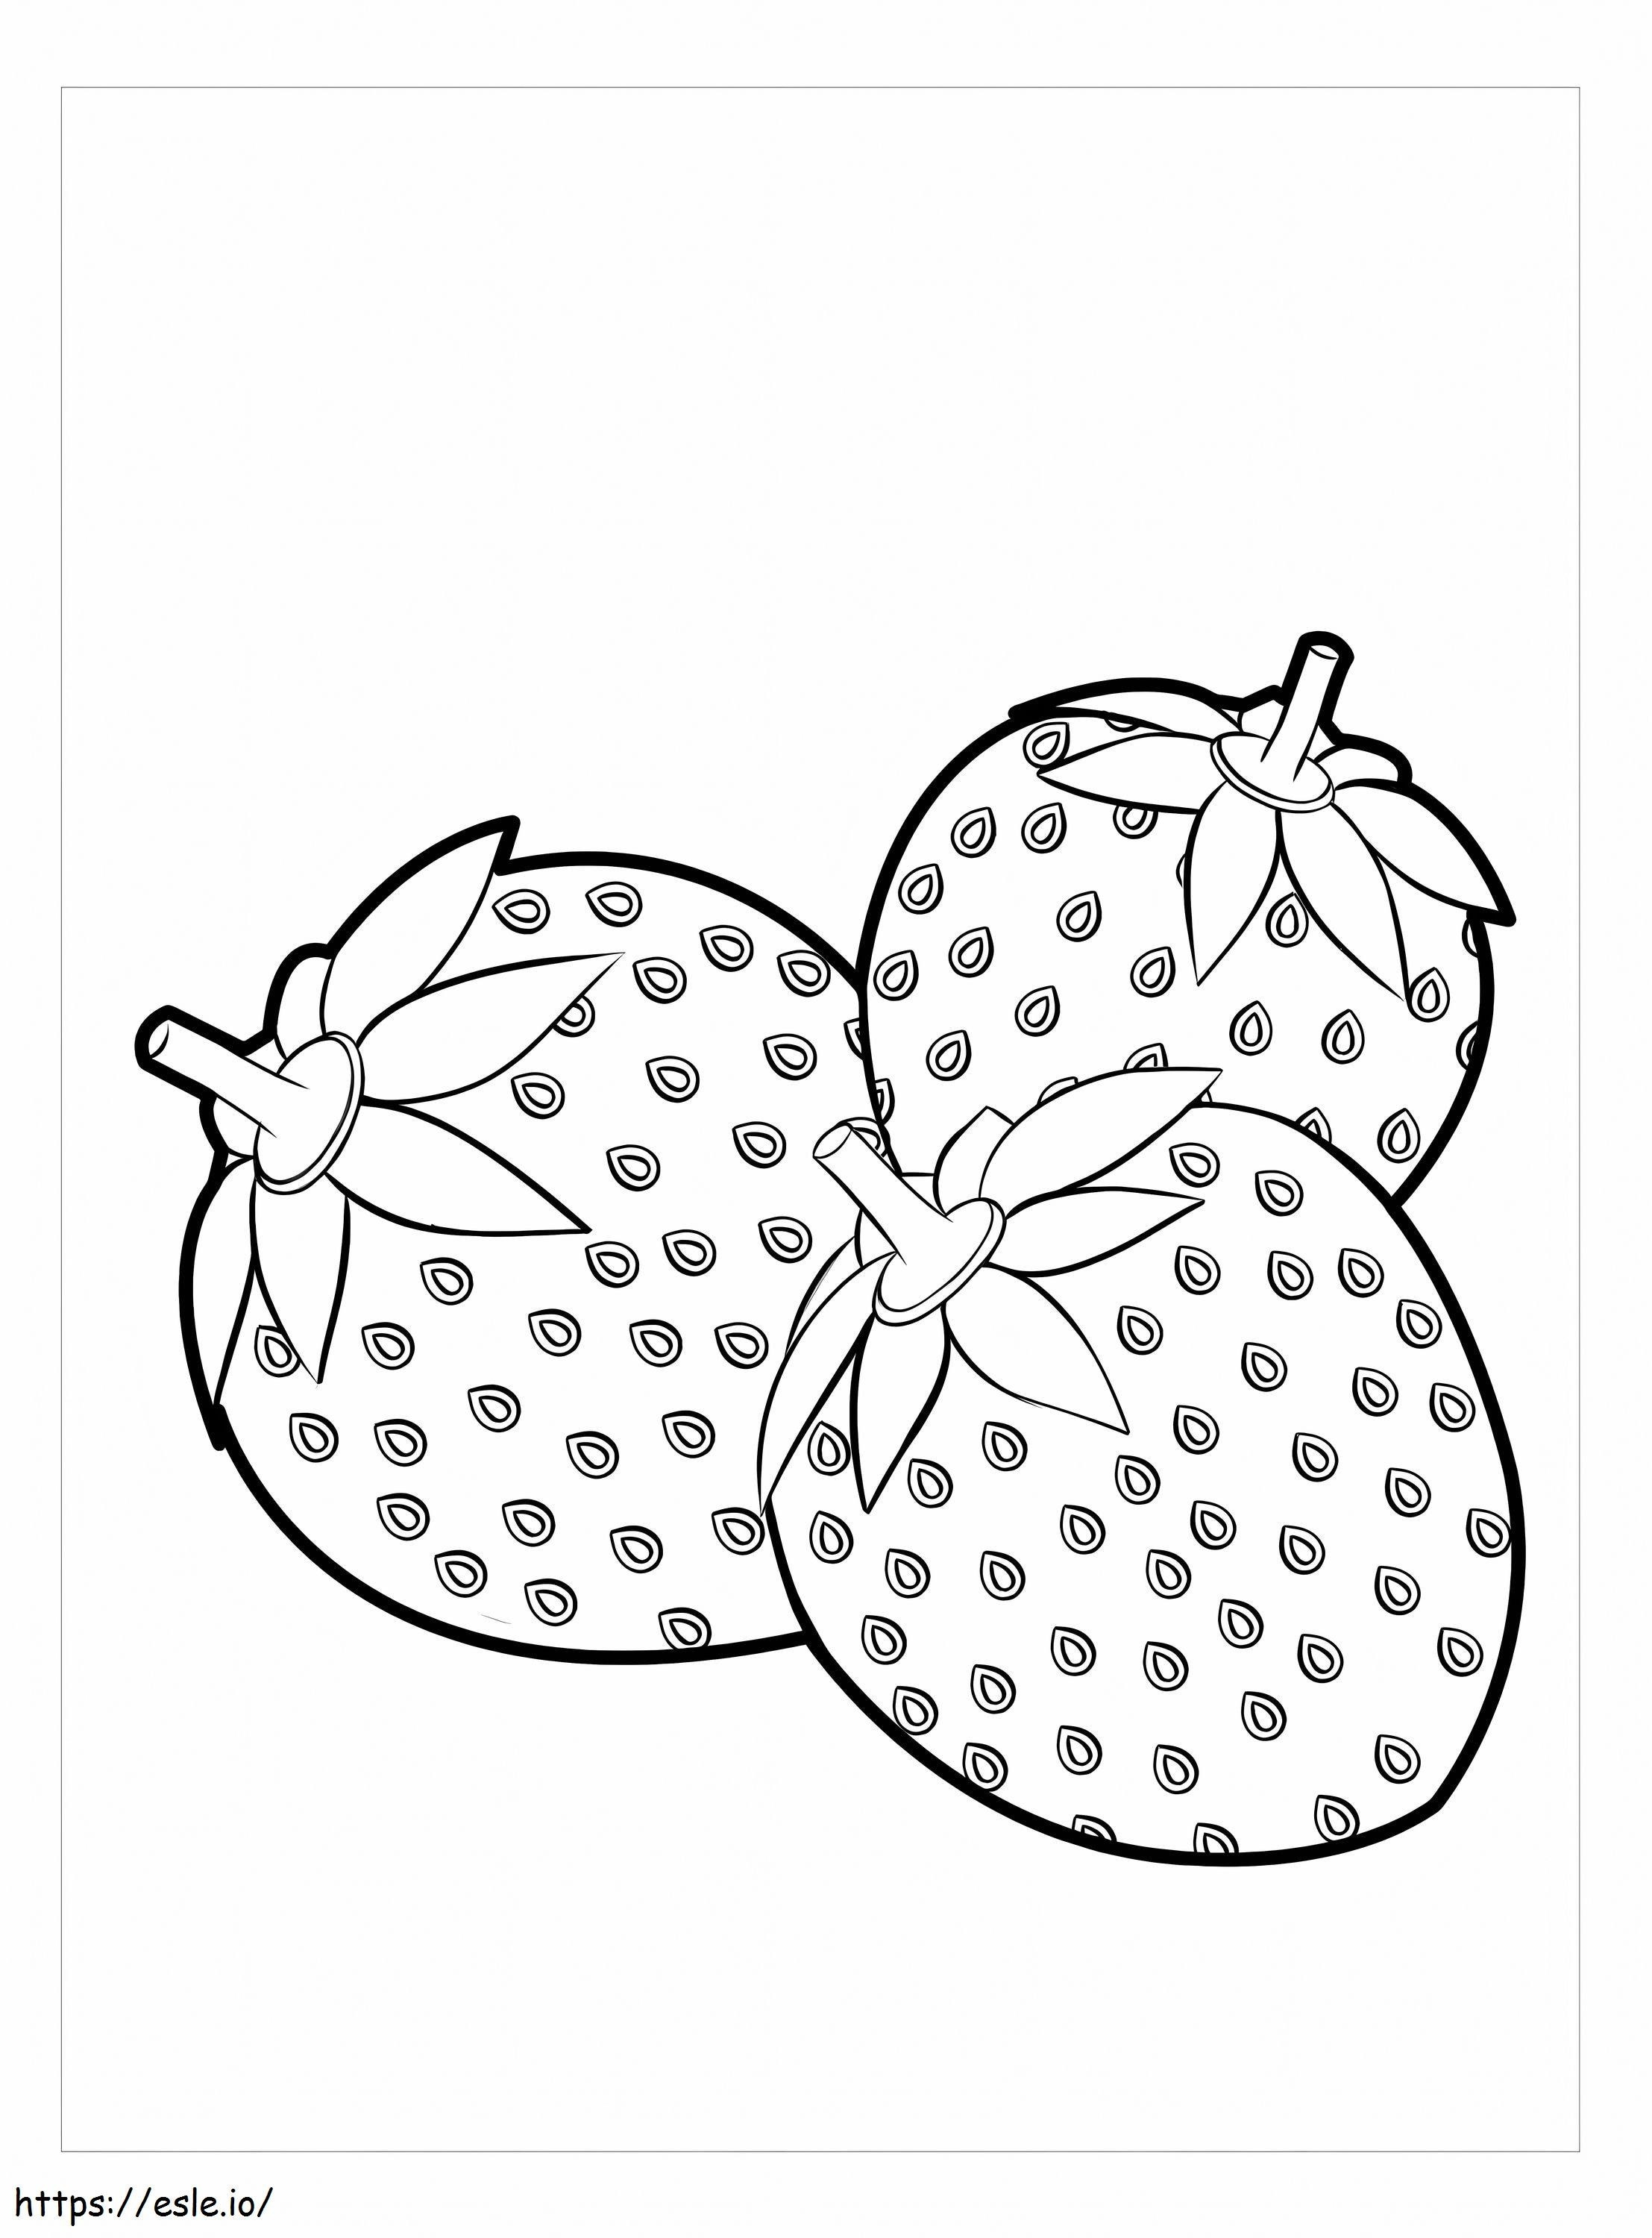 Three Basic Strawberries coloring page